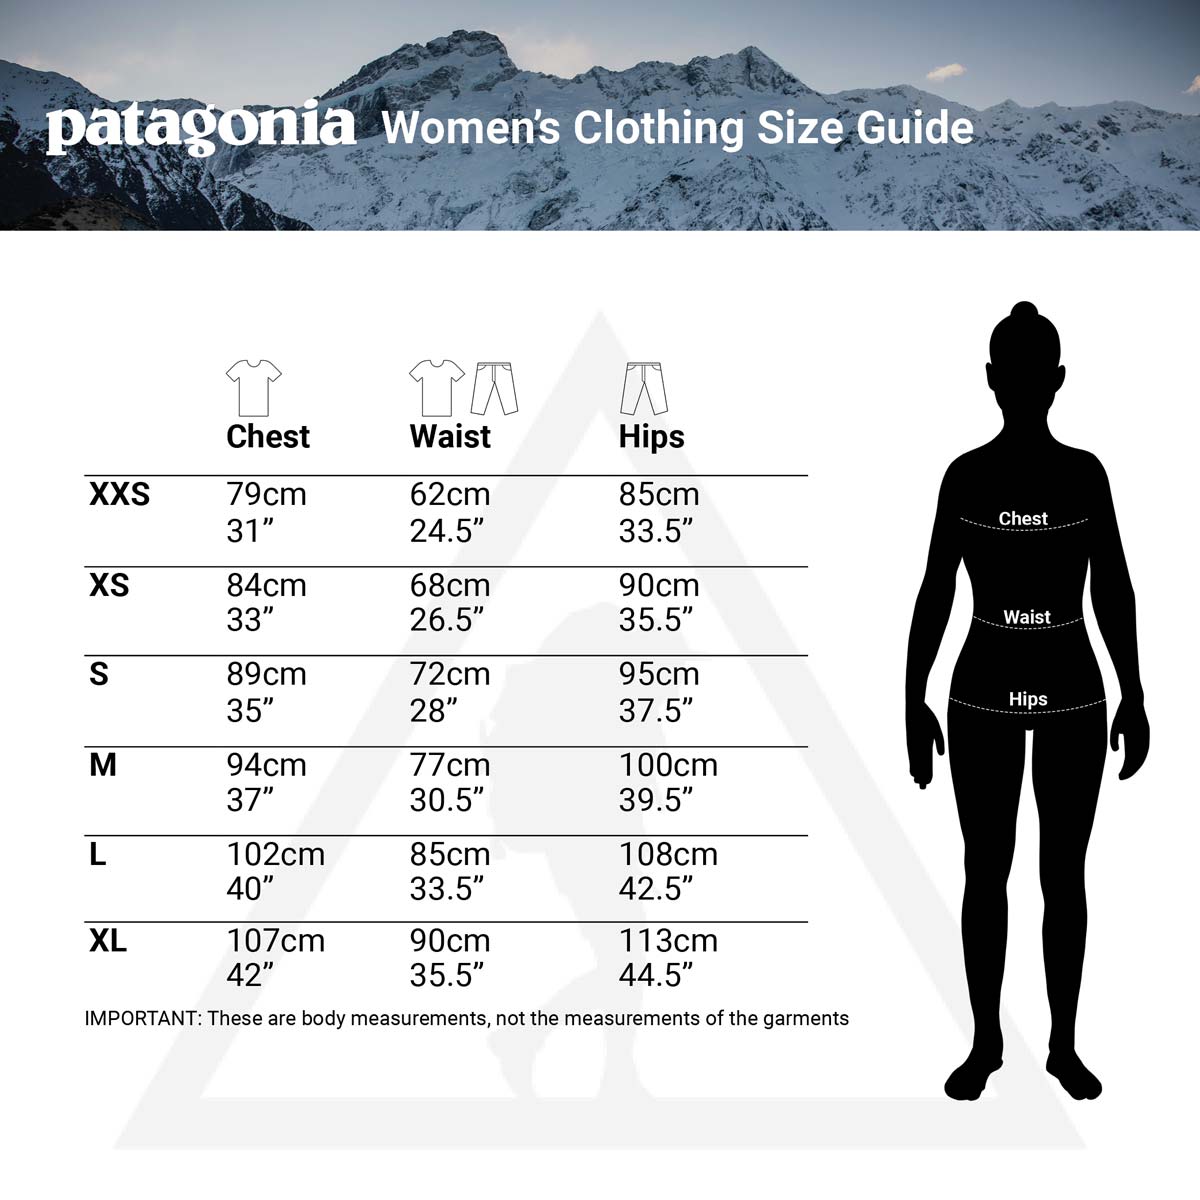 Patagonia Clothing Sizing Chart - Complete Outdoors NZ